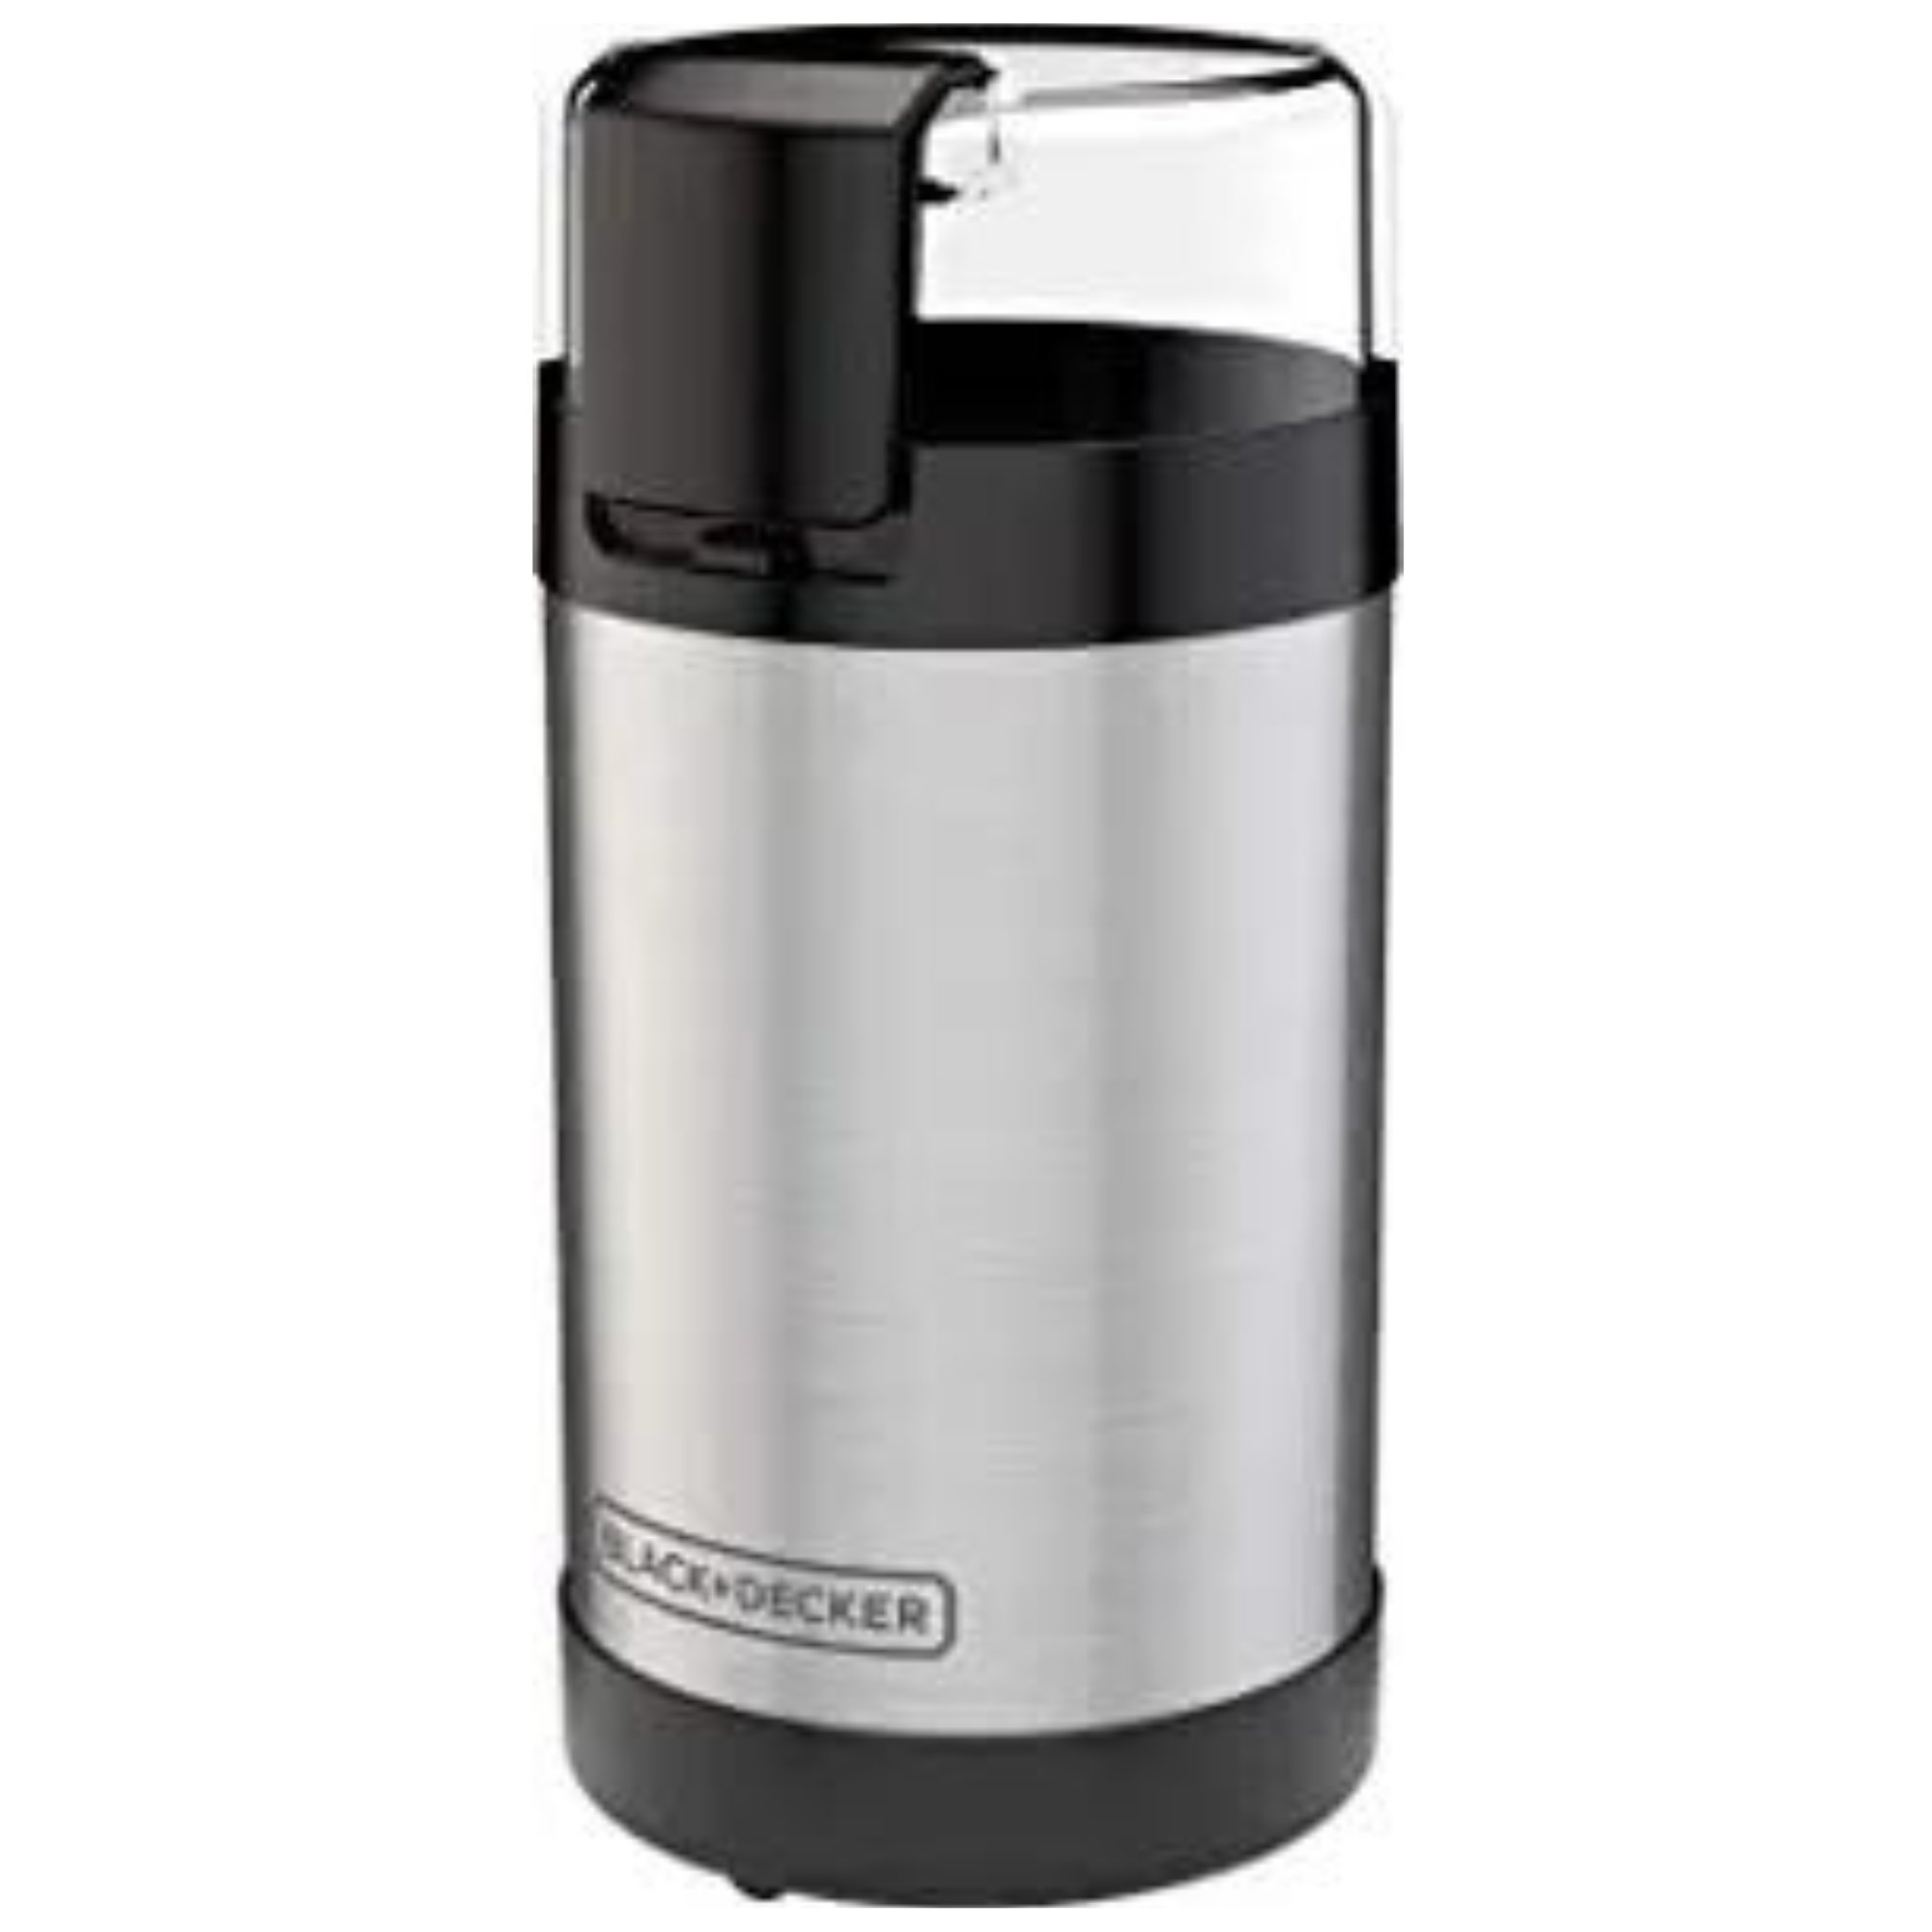 JOYDING Electric Coffee Grinder for Beans, Spices, Herbal Nuts, Grains with  Stainless Steel Blades